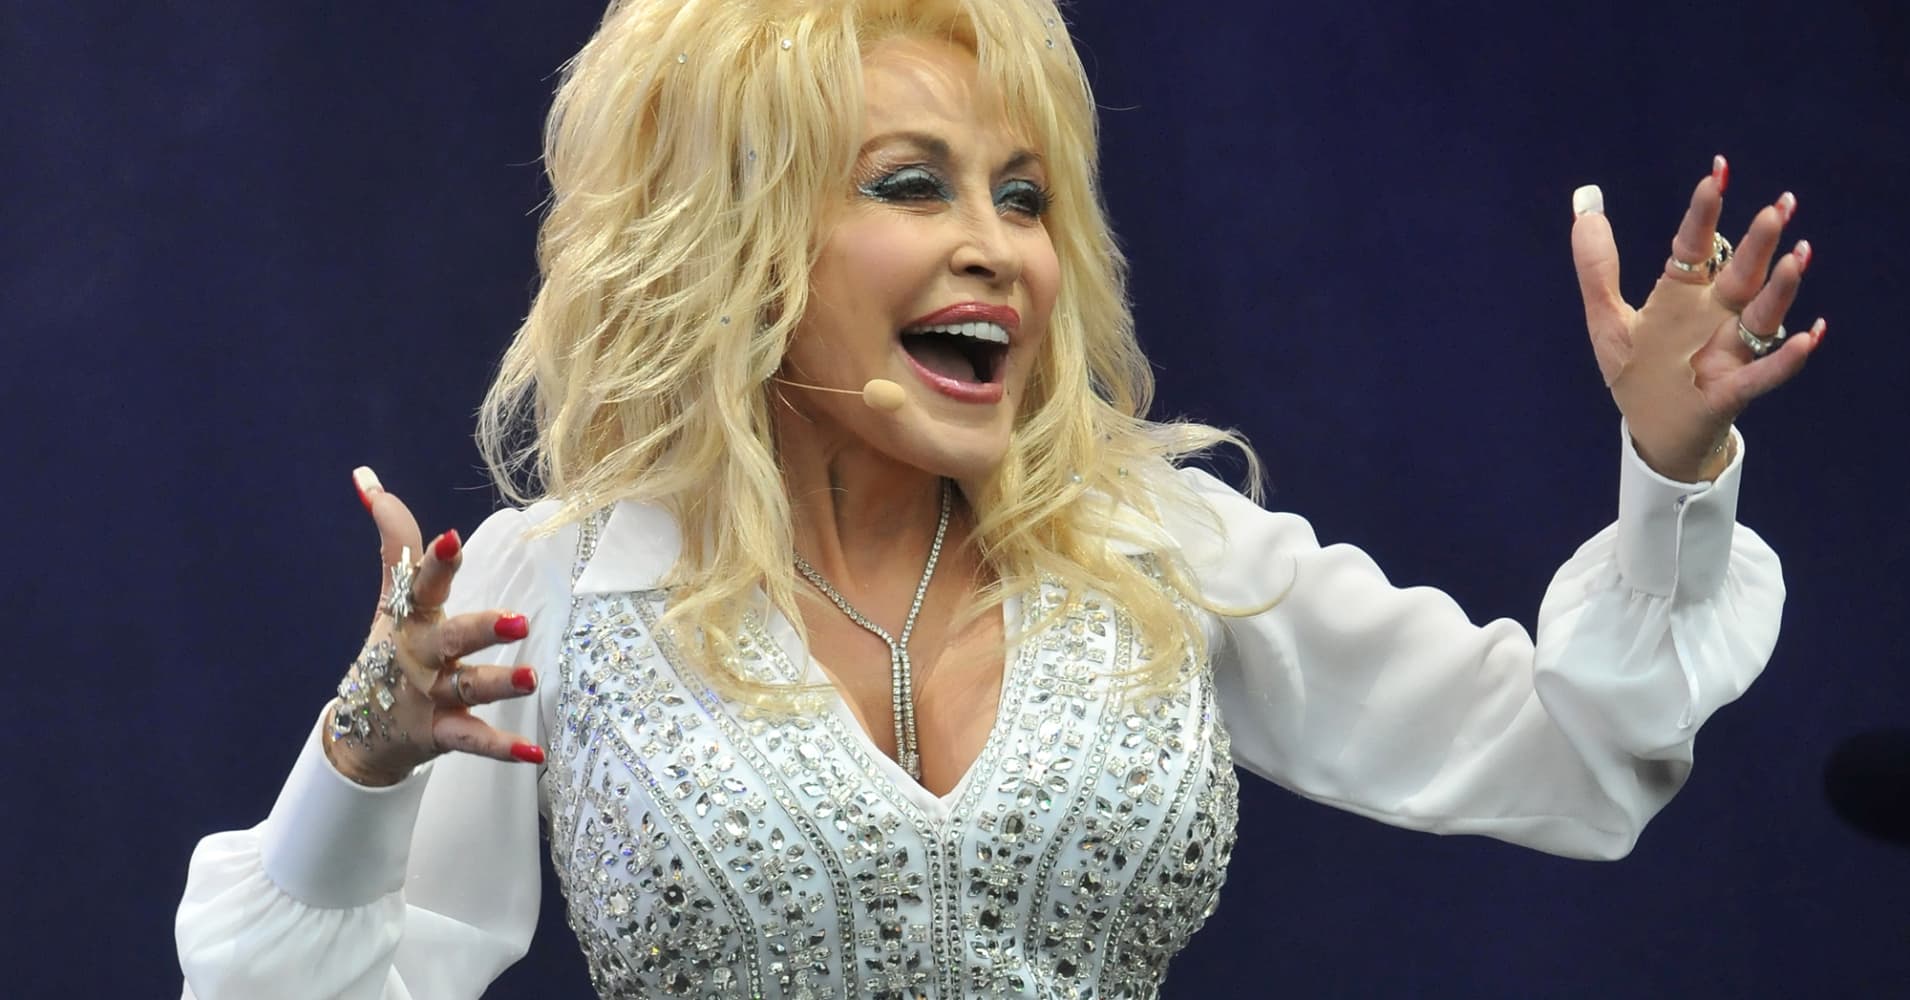 Dolly Parton opens new resort after $300M investment